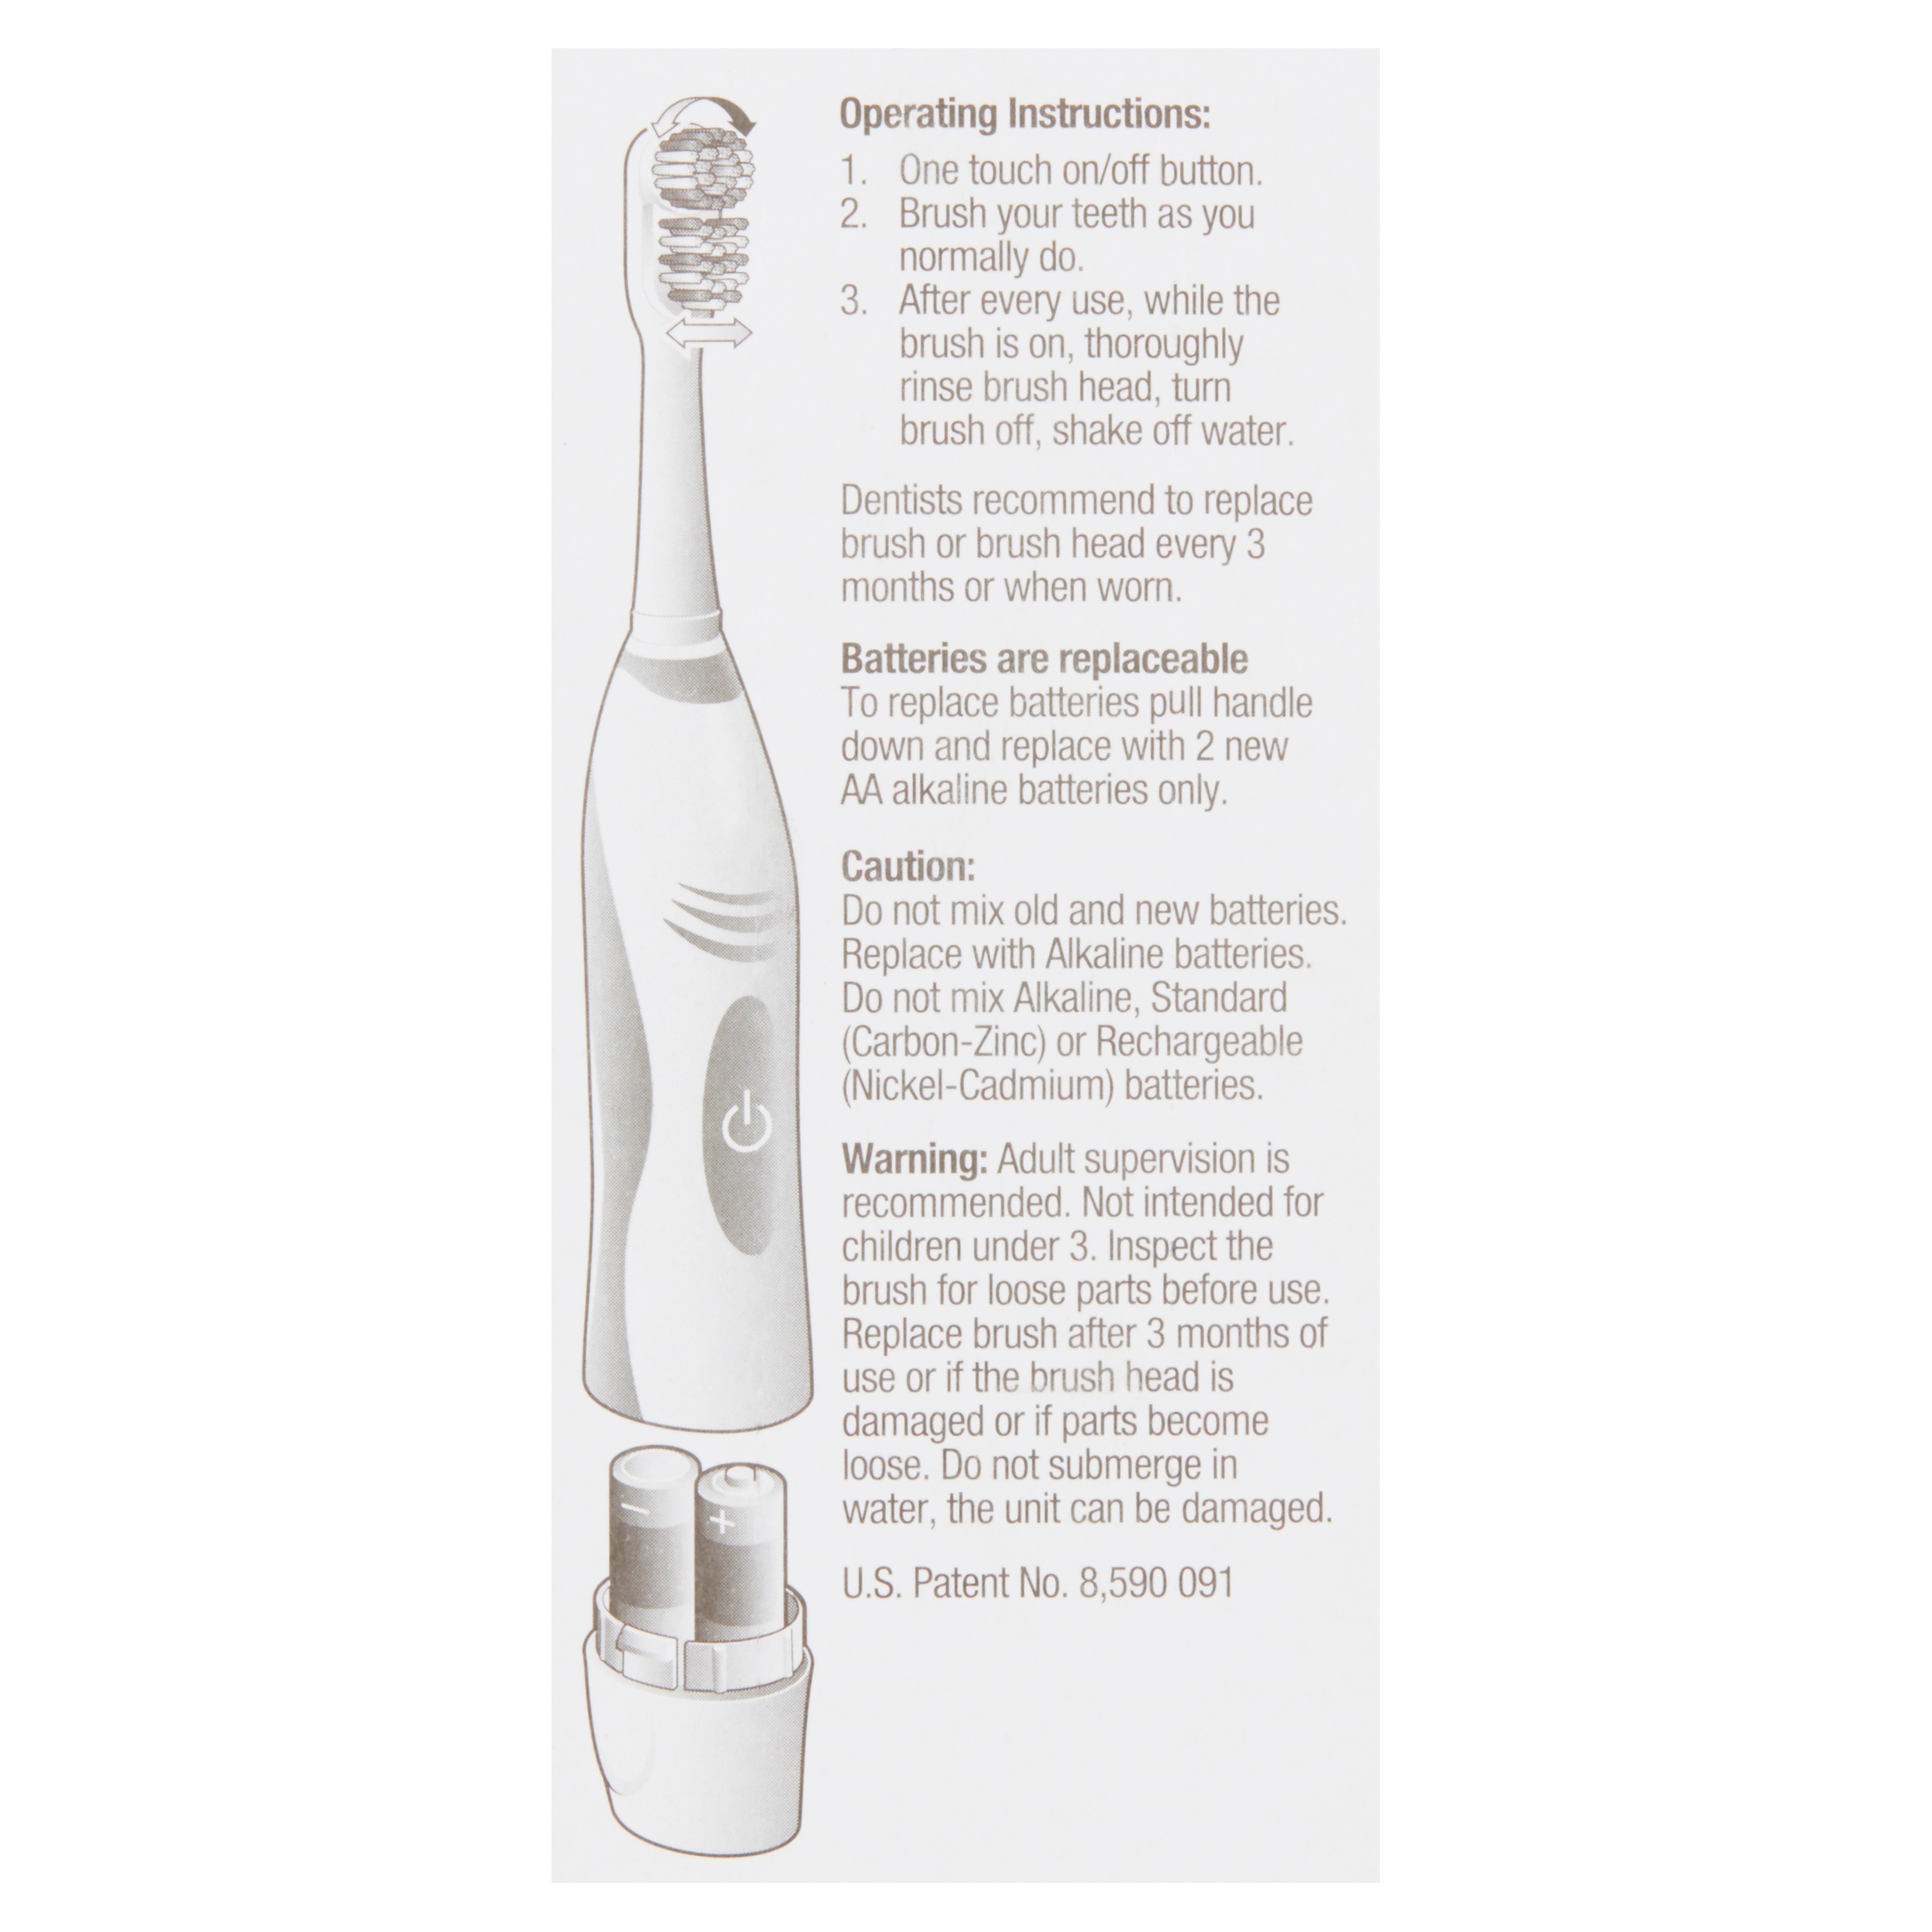 Equate soft dual action power toothbrush for deep cleaning, 1 count - image 5 of 9